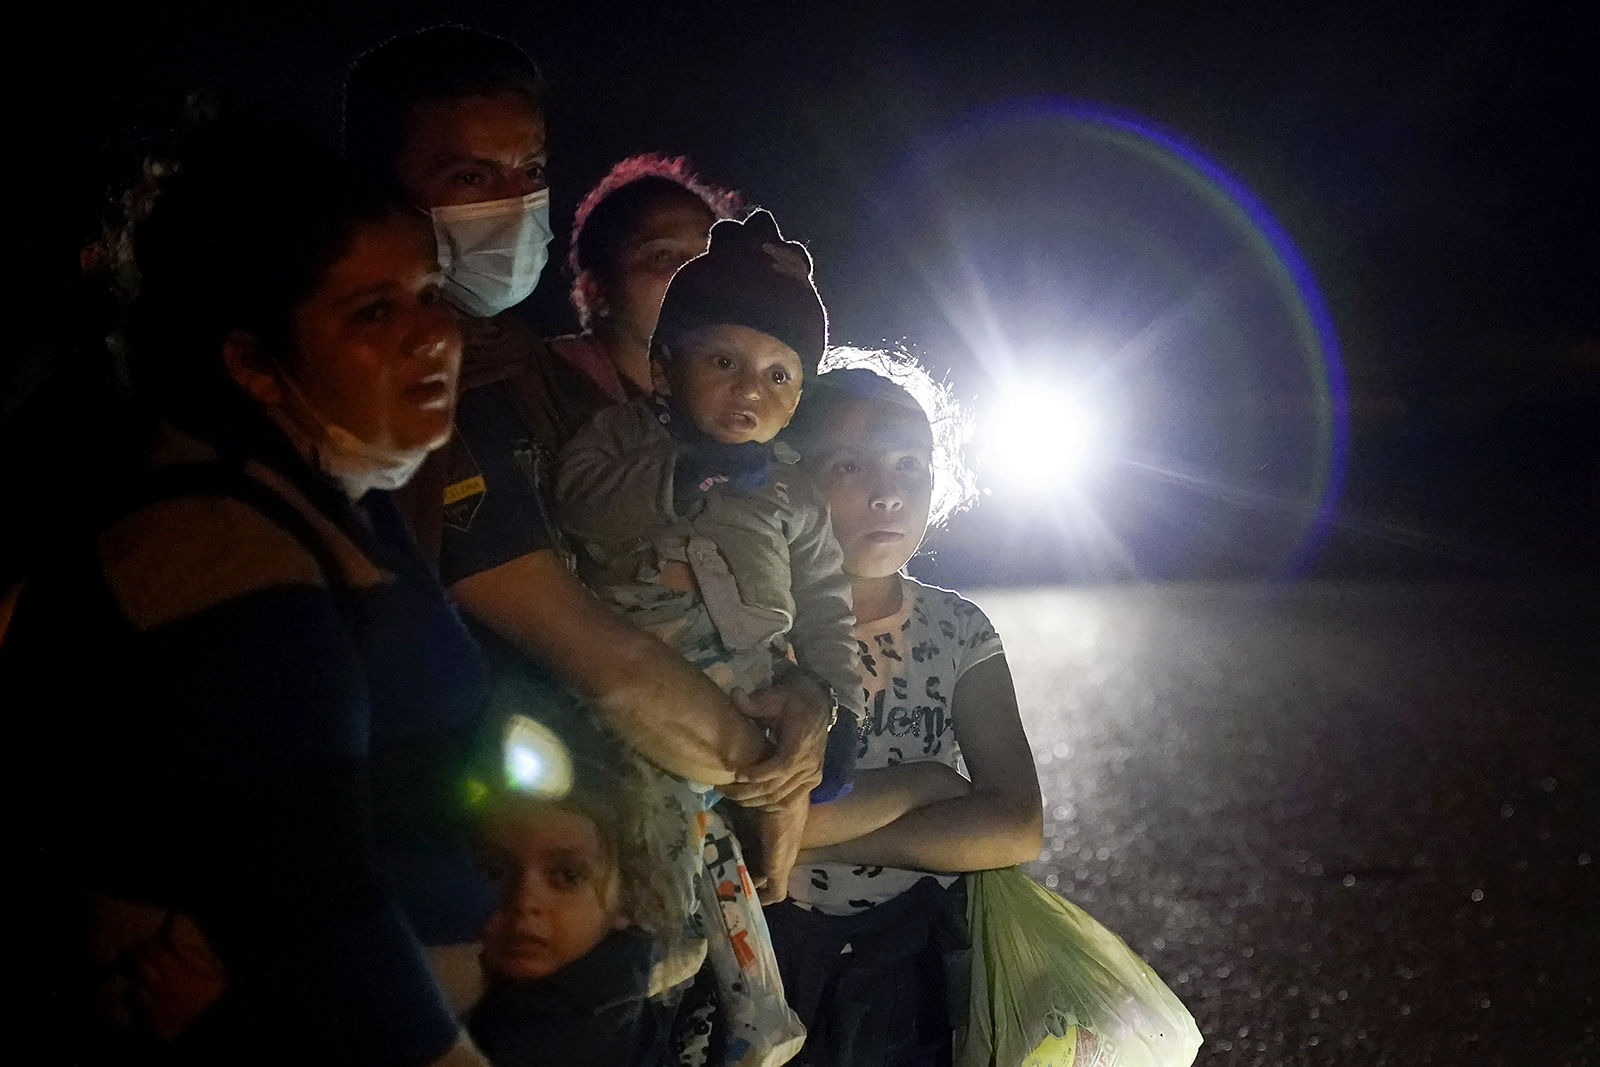 A group of migrants mainly from Honduras and Nicaragua wait along a road after turning themselves in upon crossing the U.S.-Mexico border, in La Joya, Texas, May 17, 2021. The Biden administration announced Tuesday, June 15, 2021, that it was expanding a newly-revived effort to bring Central American children to the United States to reunite with parents legally living in the country. (AP Photo/Gregory Bull, File)